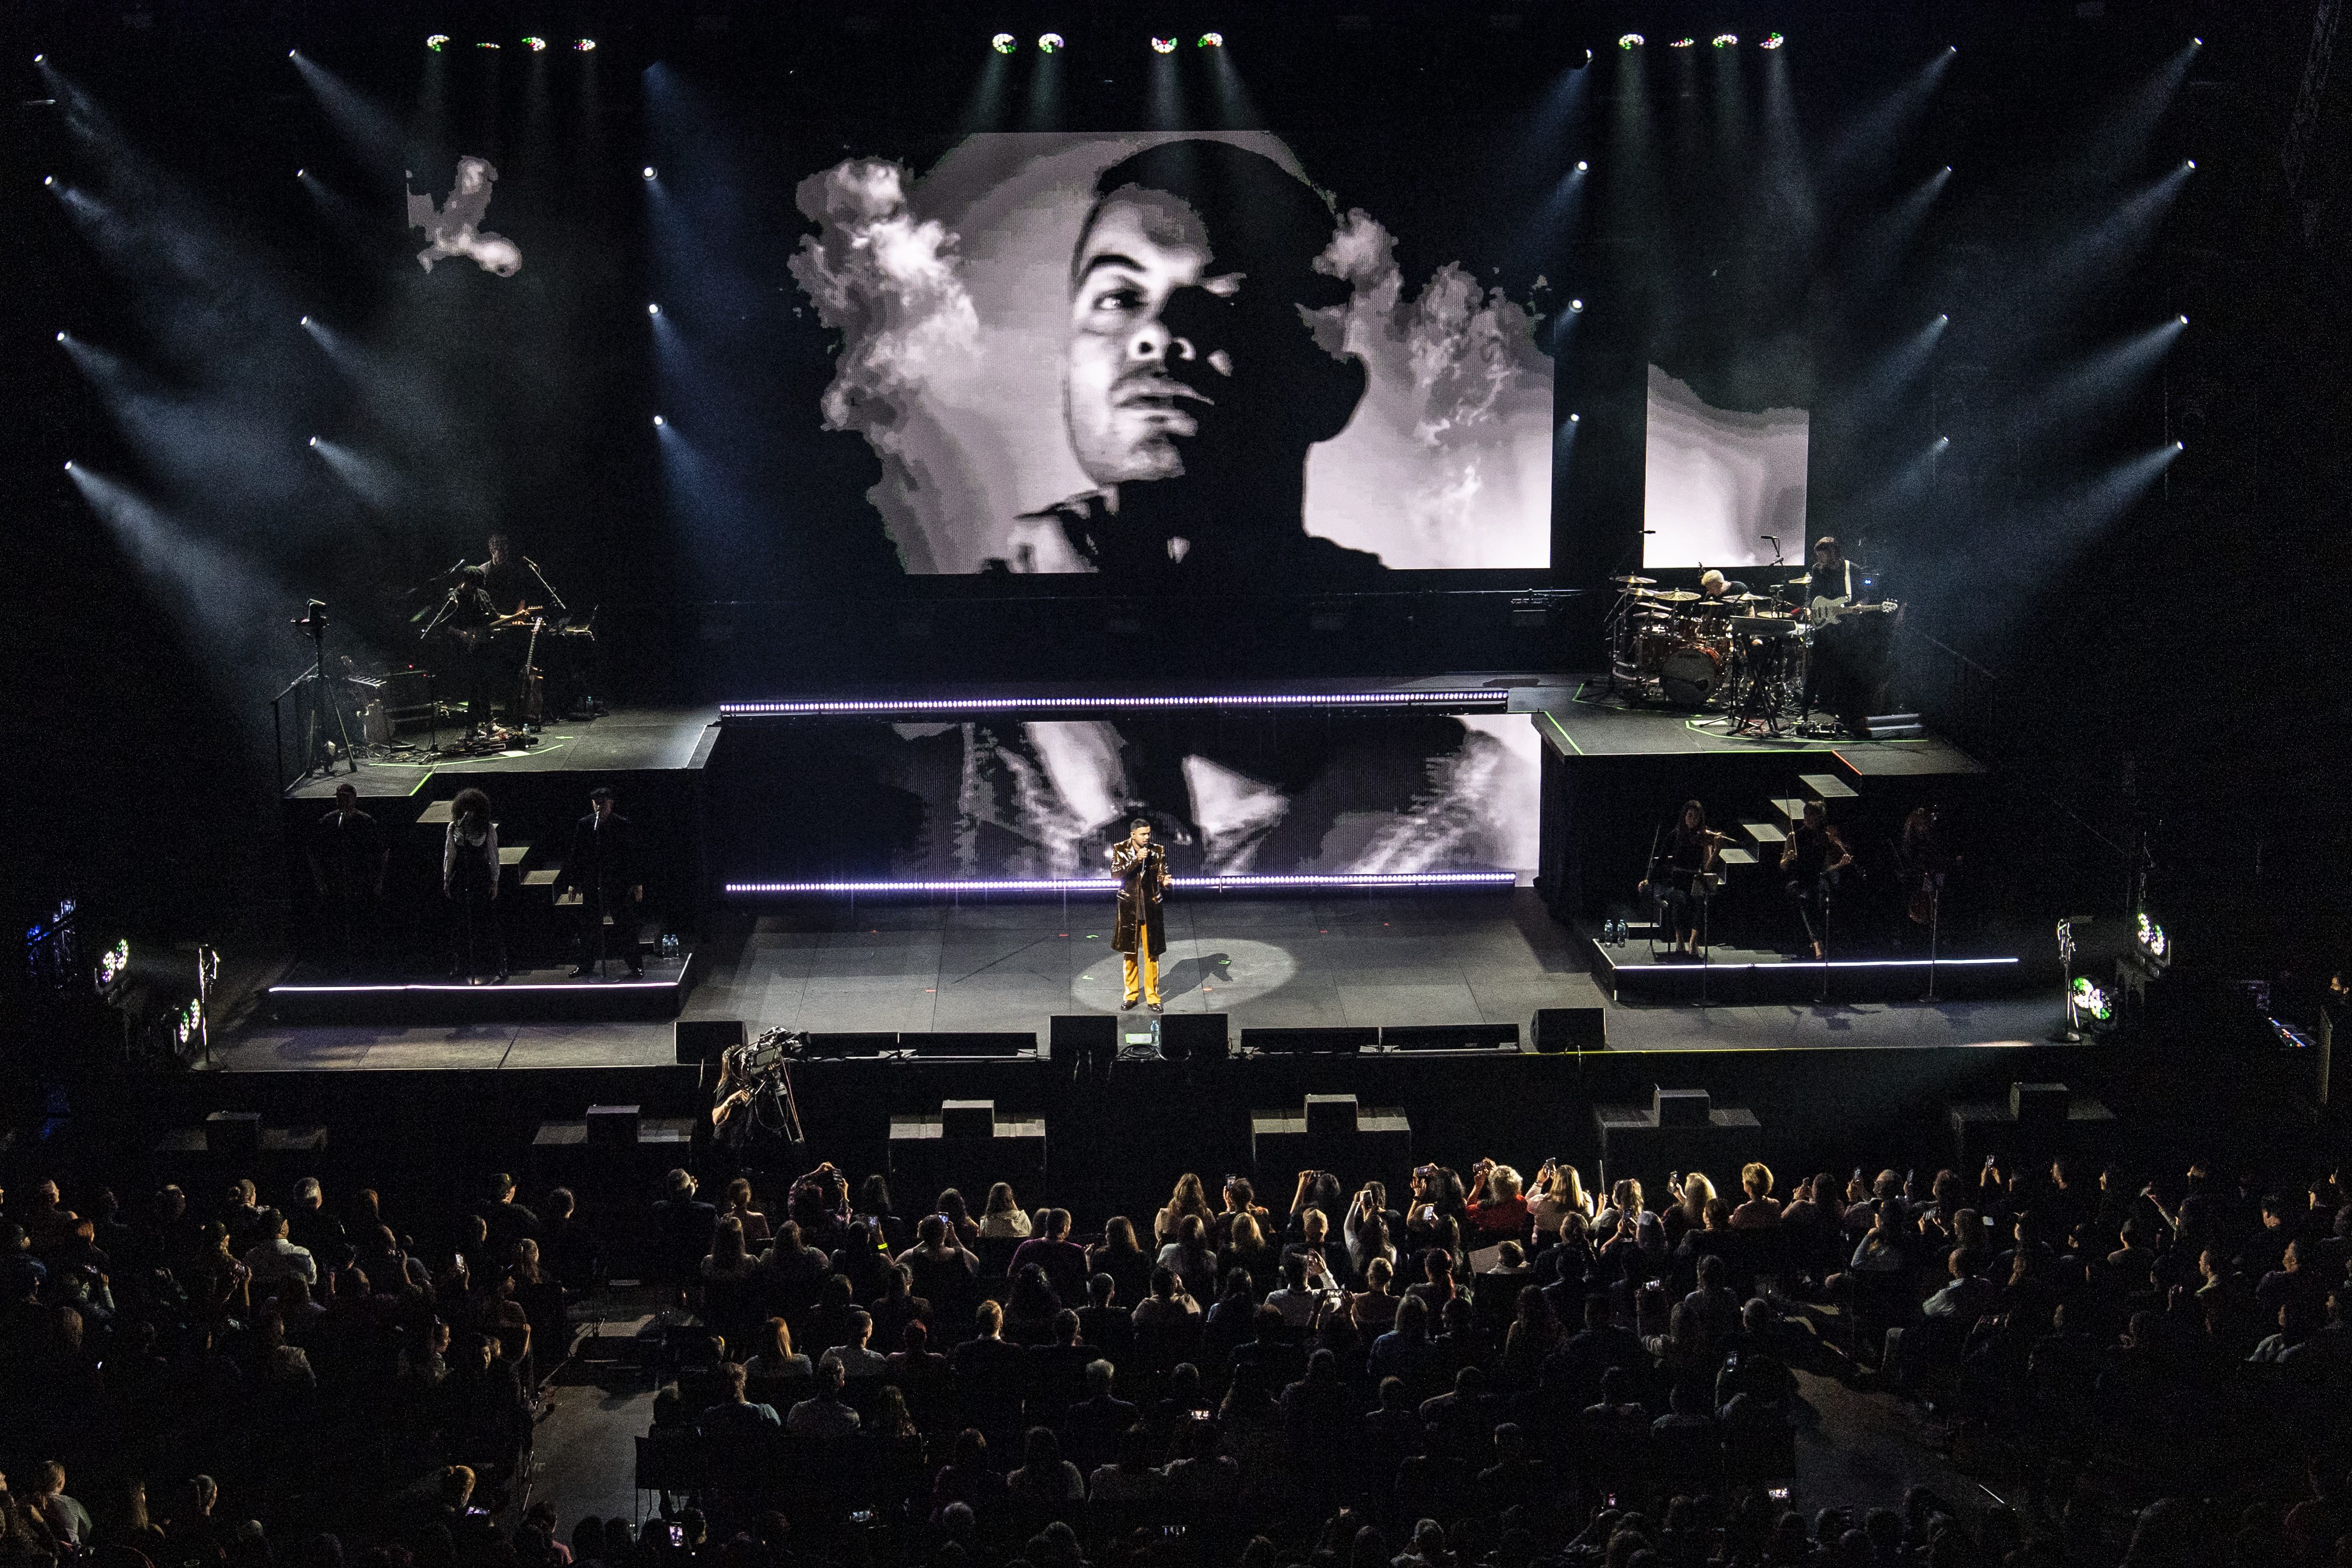 Guy Sebastian's in concert at the ICC in Sydney on his T.R.U.T.H. Tour. 27th April 2022